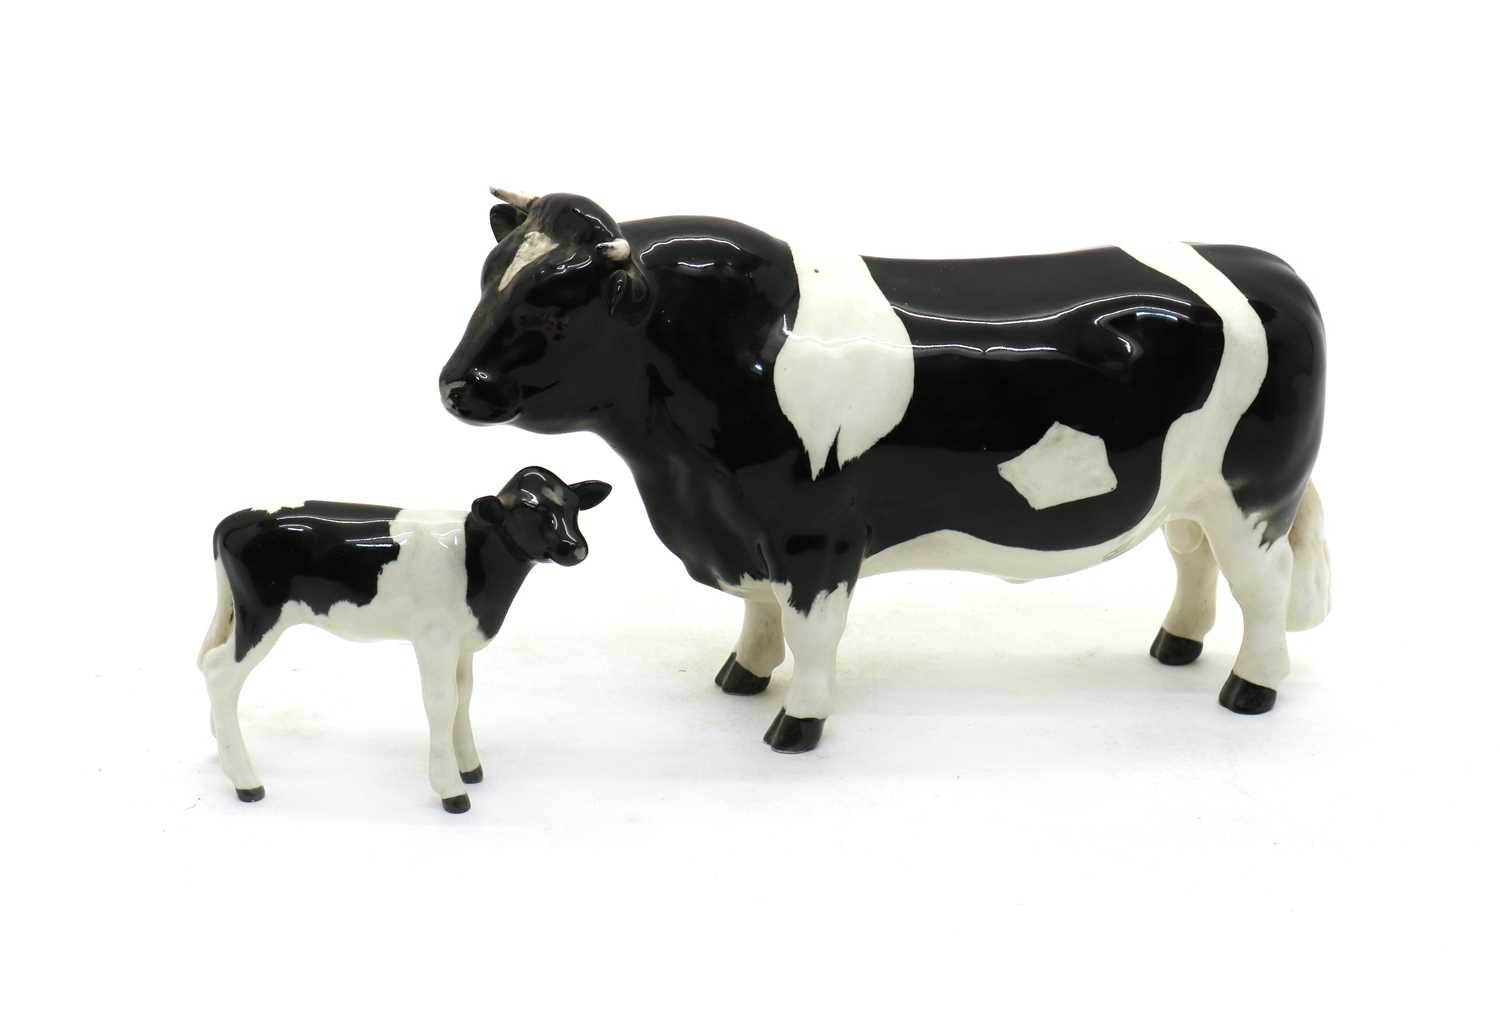 A pair of Beswick pottery figures